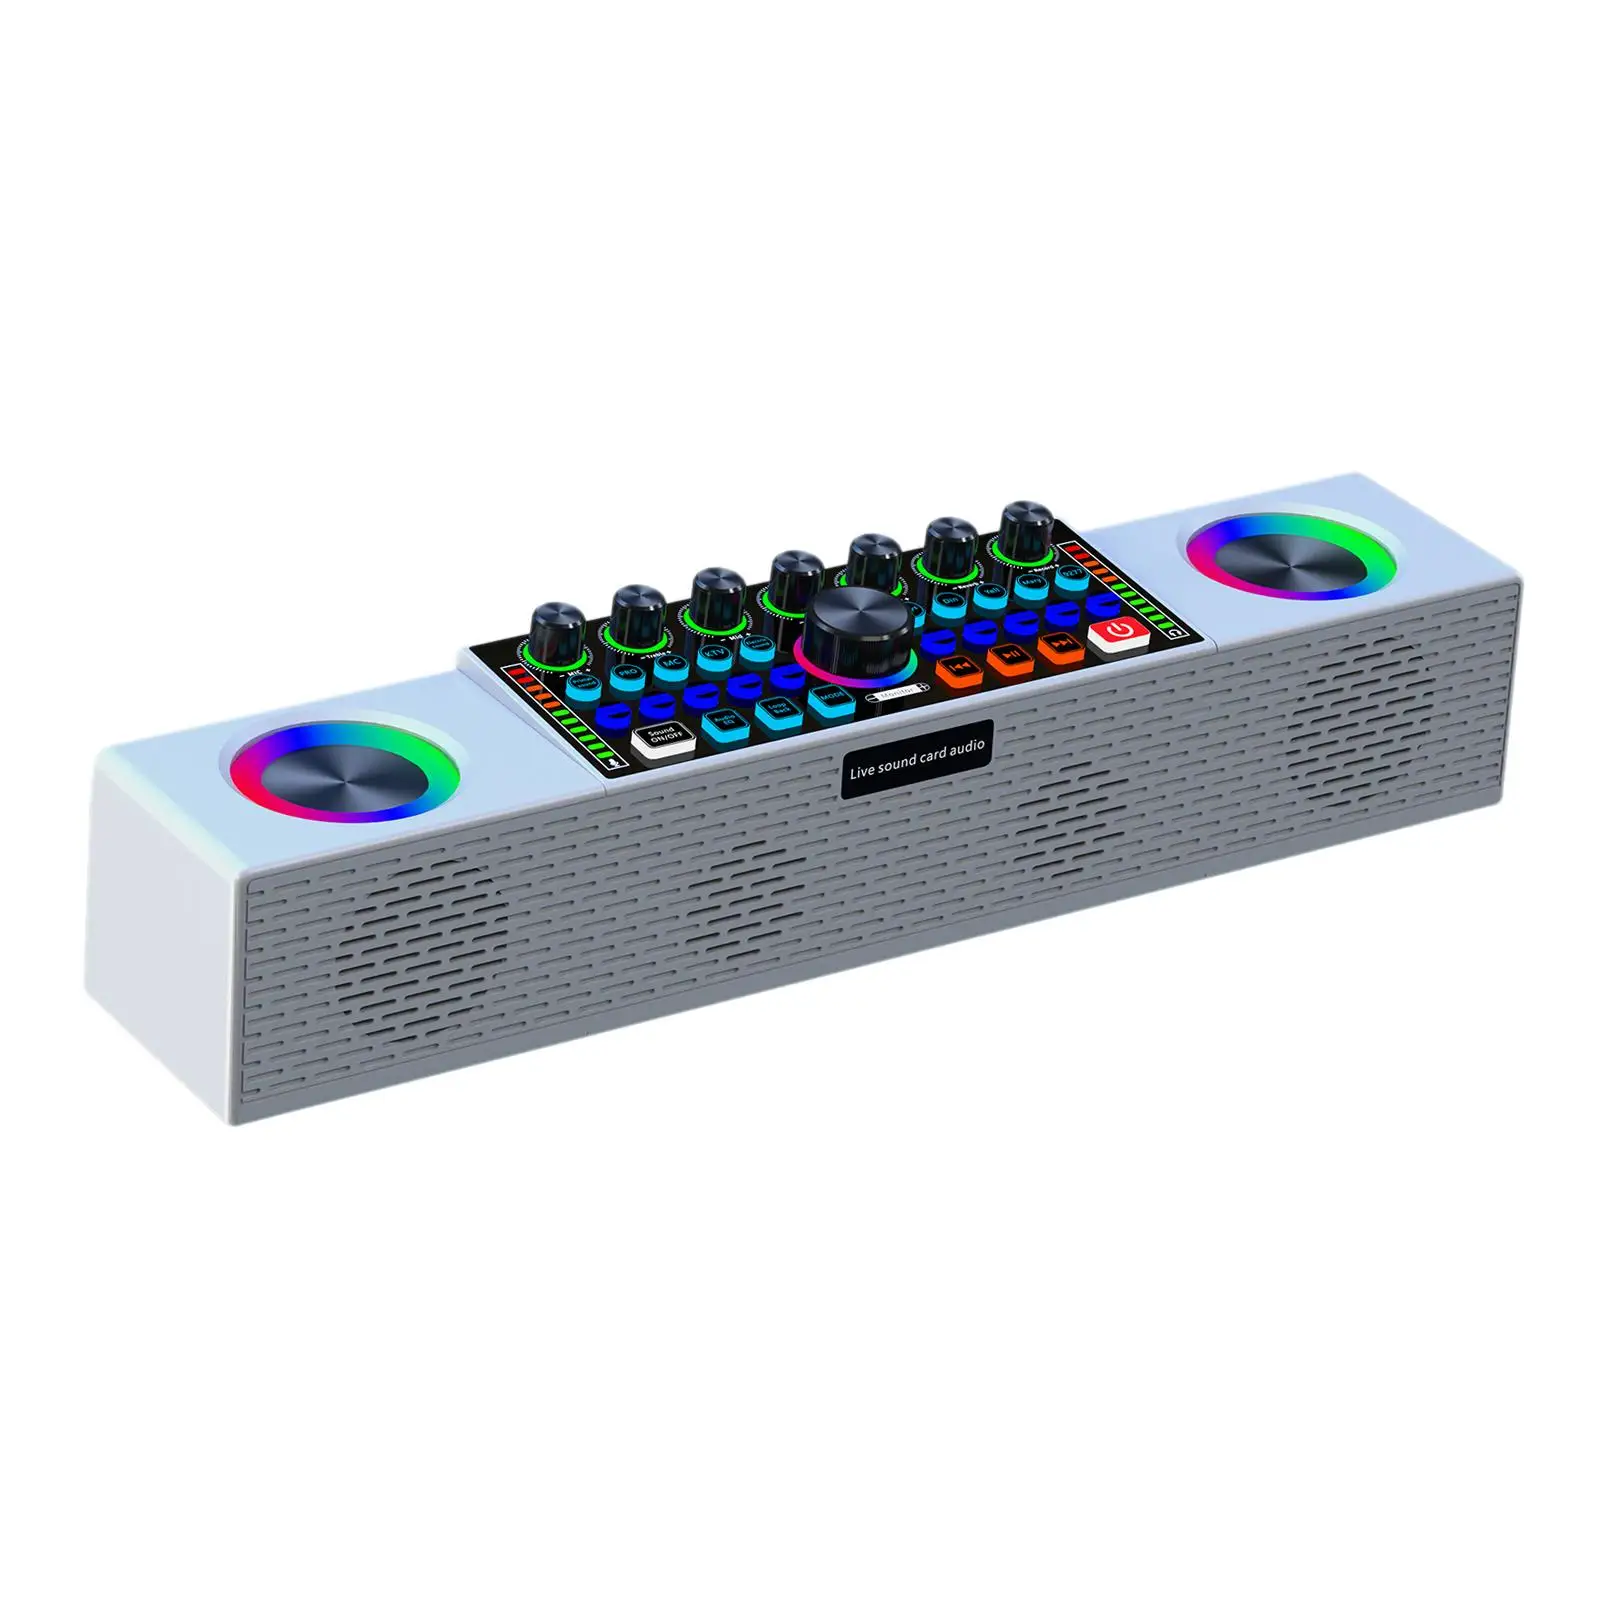 Live Sound Card Radio with DJ Mixer Effects External Audio Mixer for Music Singing Record Gaming Live Streaming Phone Computer